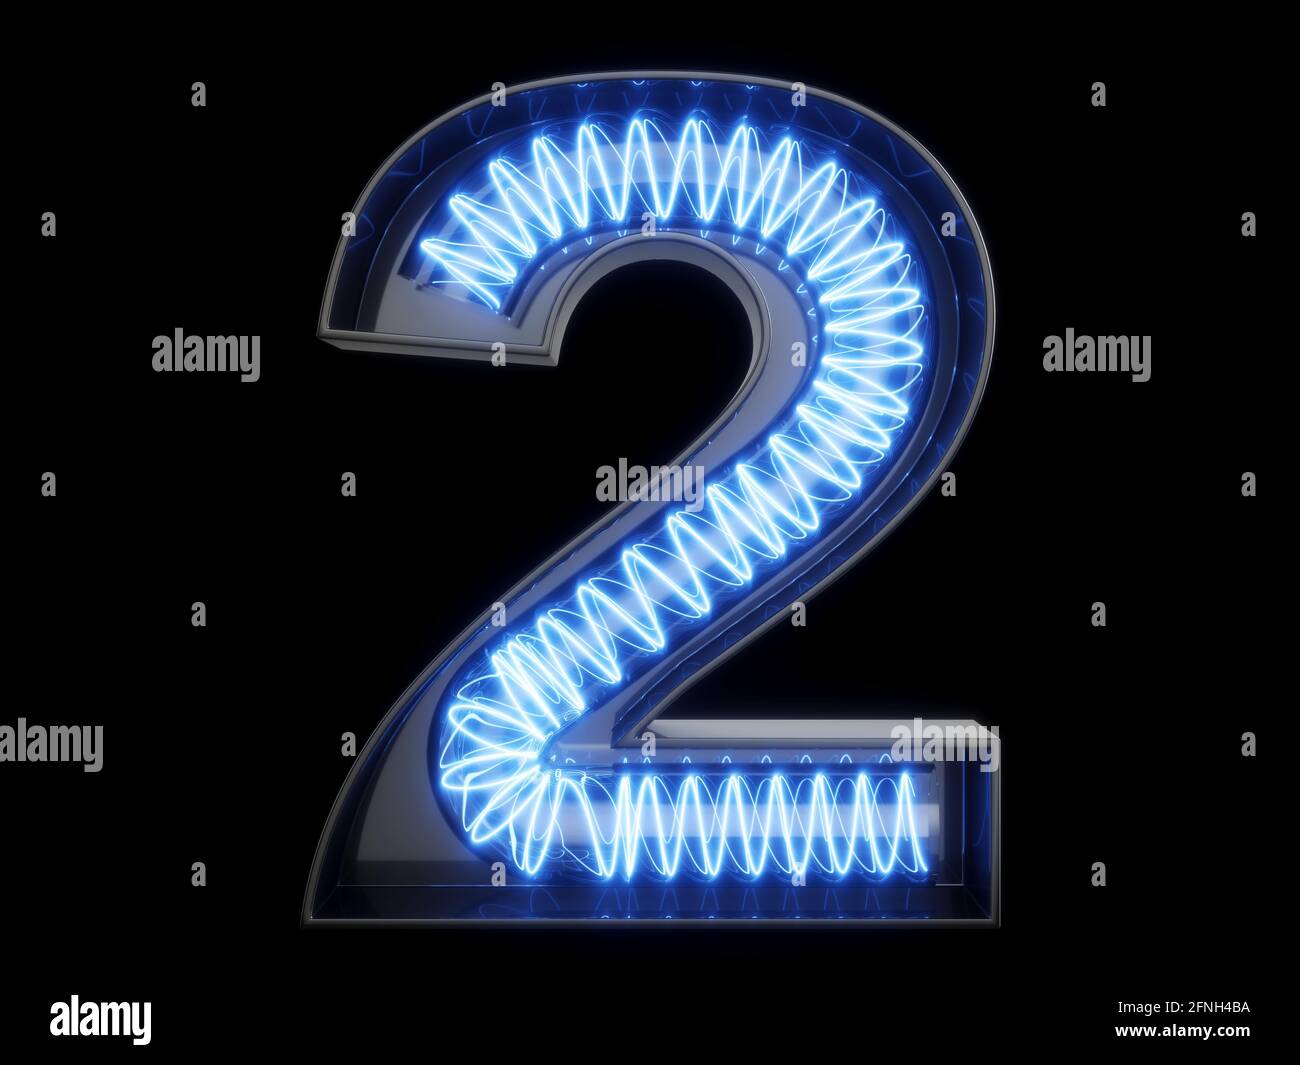 Light bulb spiral glowing digit alphabet character 2 two font. Front view illuminated number 1 symbol on black background. 3d rendering illustration Stock Photo